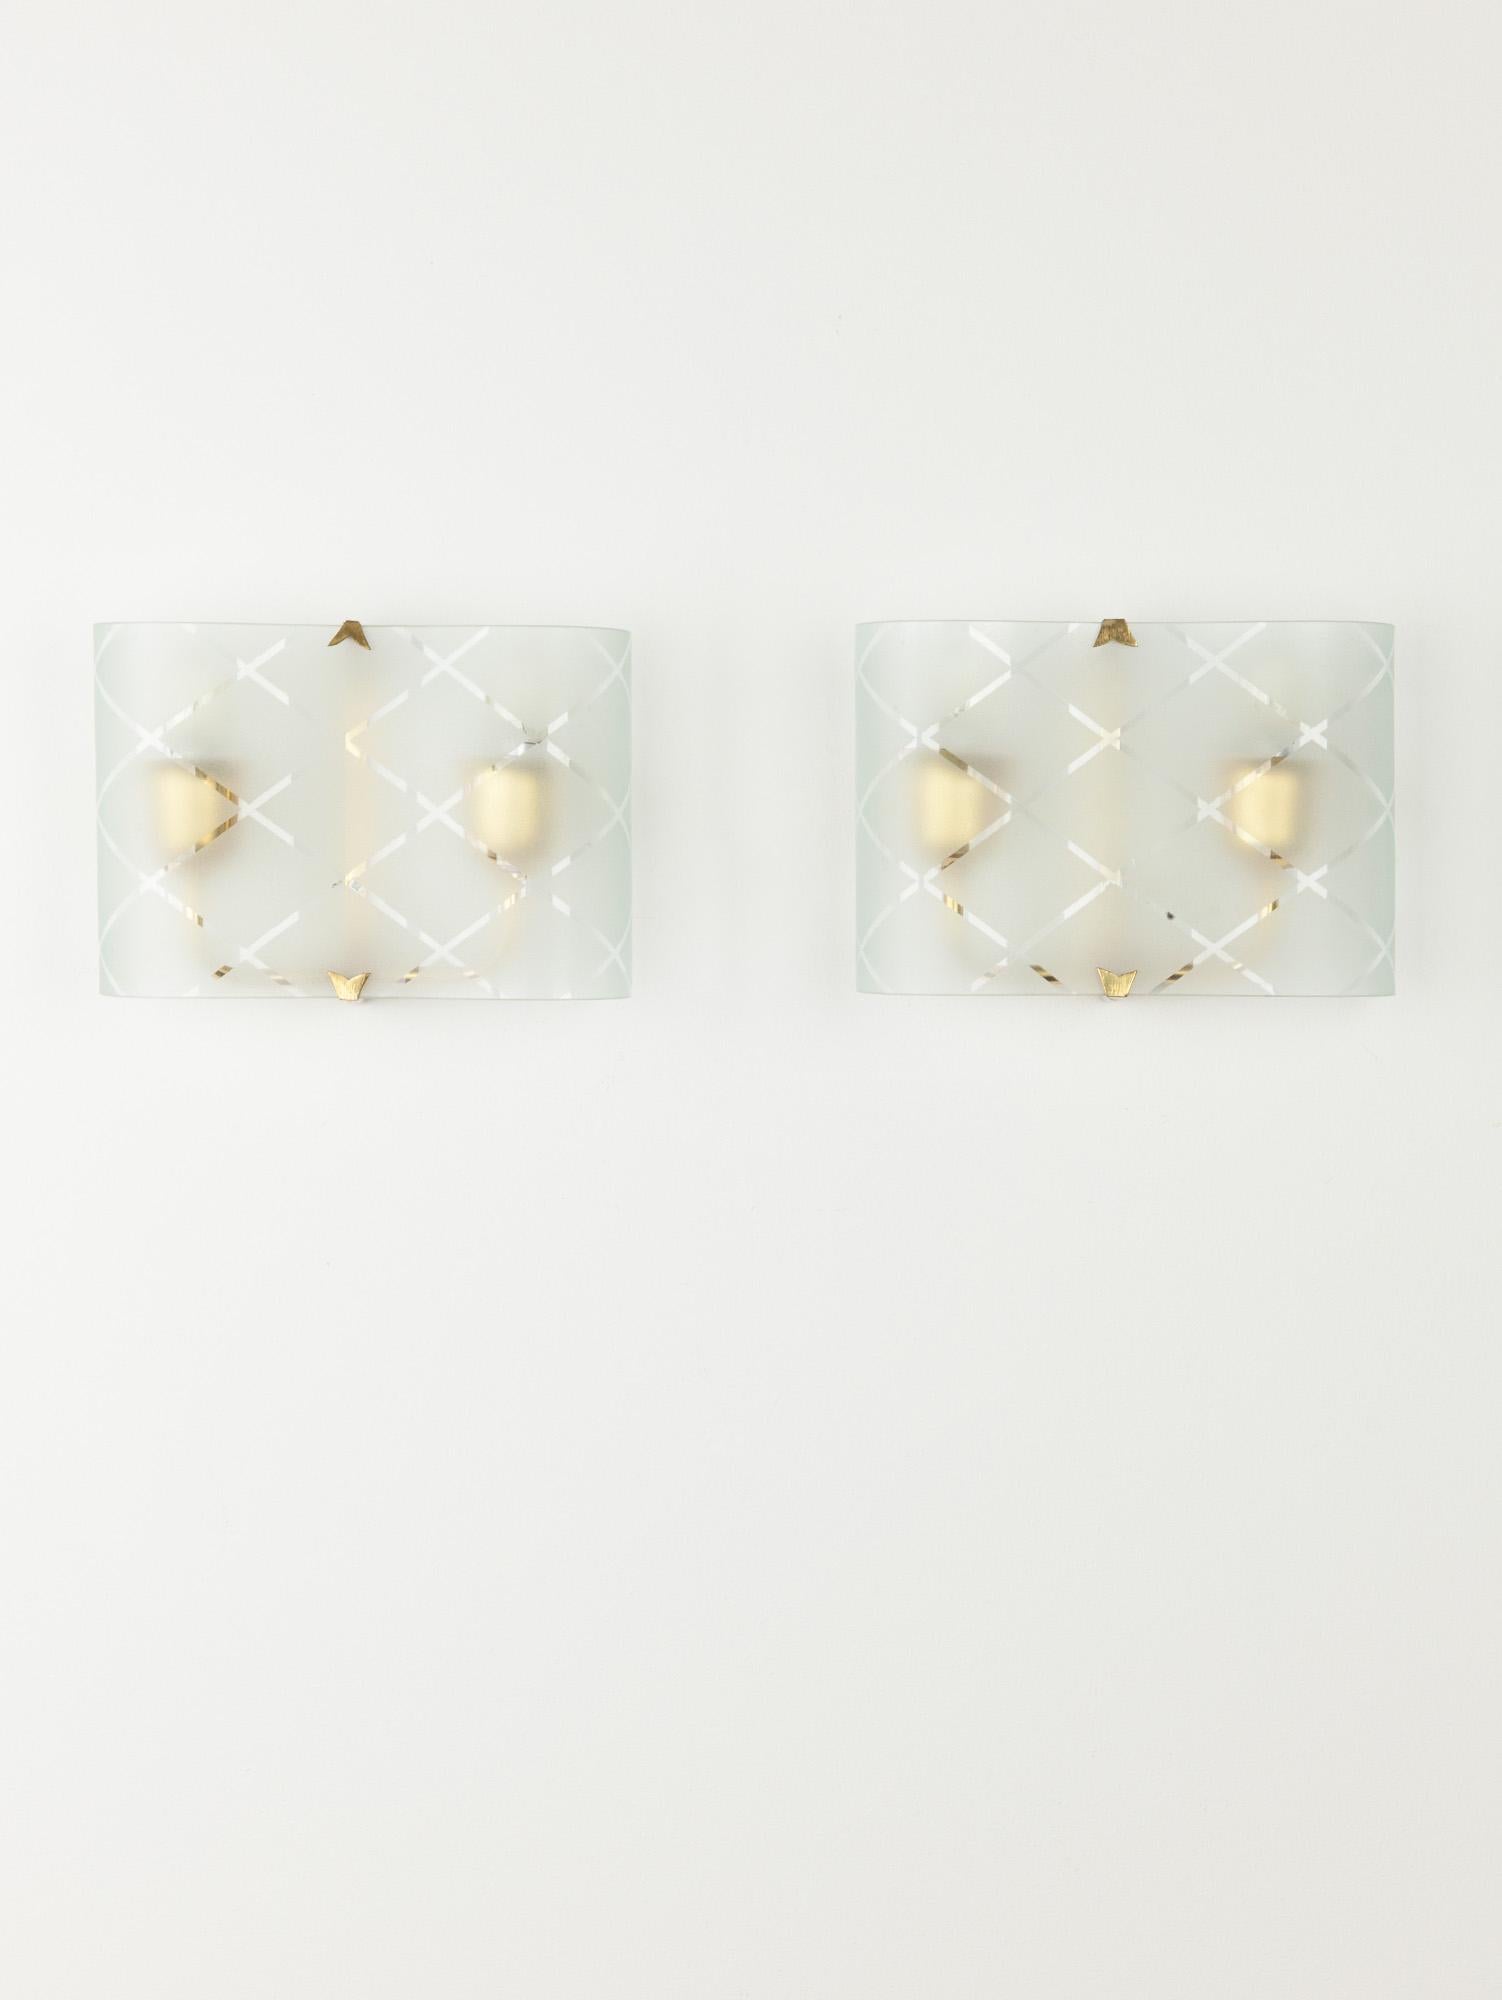 Italian Etched Glass & Brass Rectangular Wall Lights, 1950s  For Sale 9